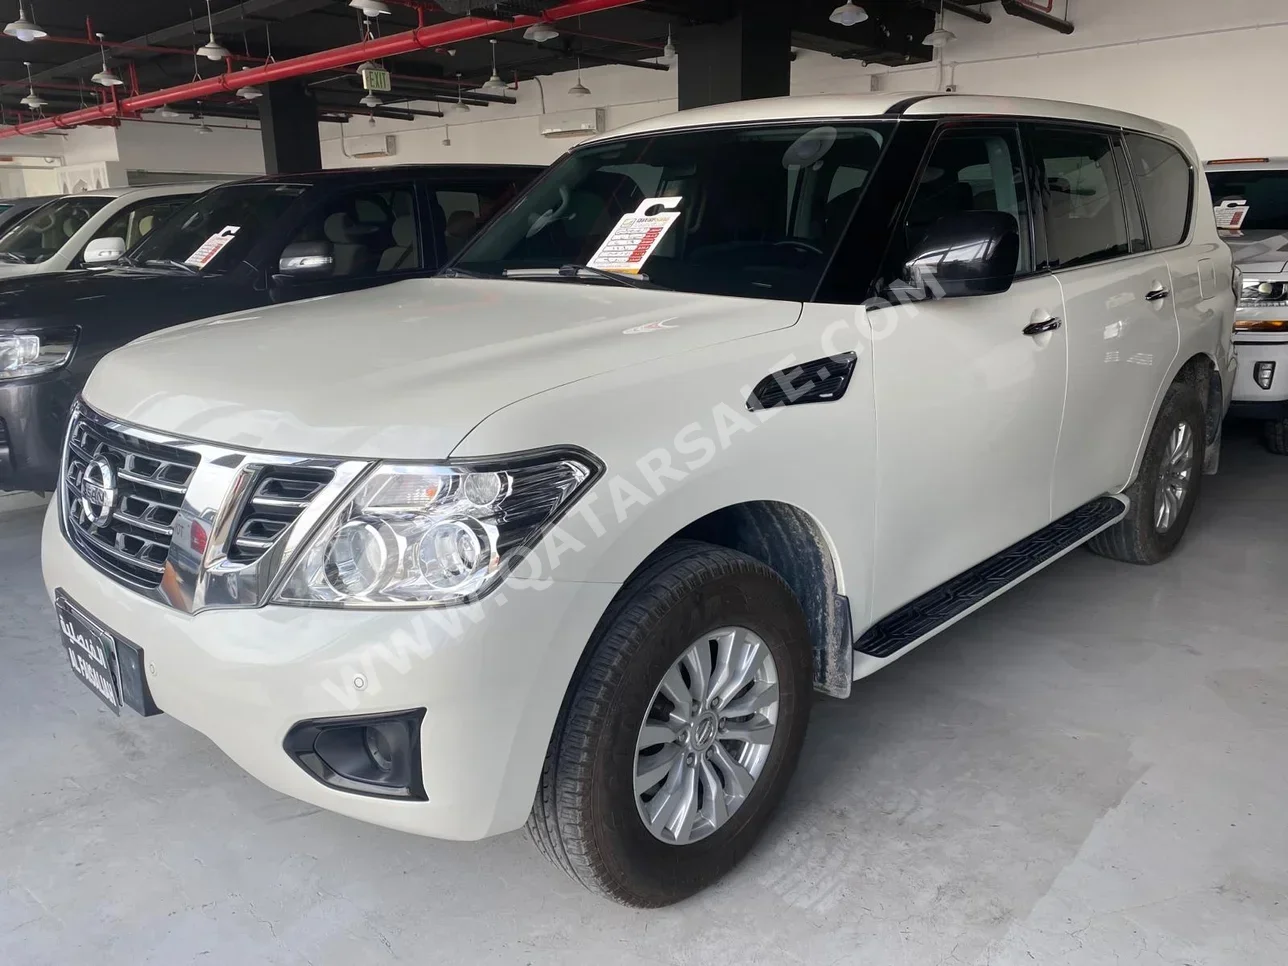 Nissan  Patrol  XE  2019  Automatic  118,000 Km  6 Cylinder  Four Wheel Drive (4WD)  SUV  White